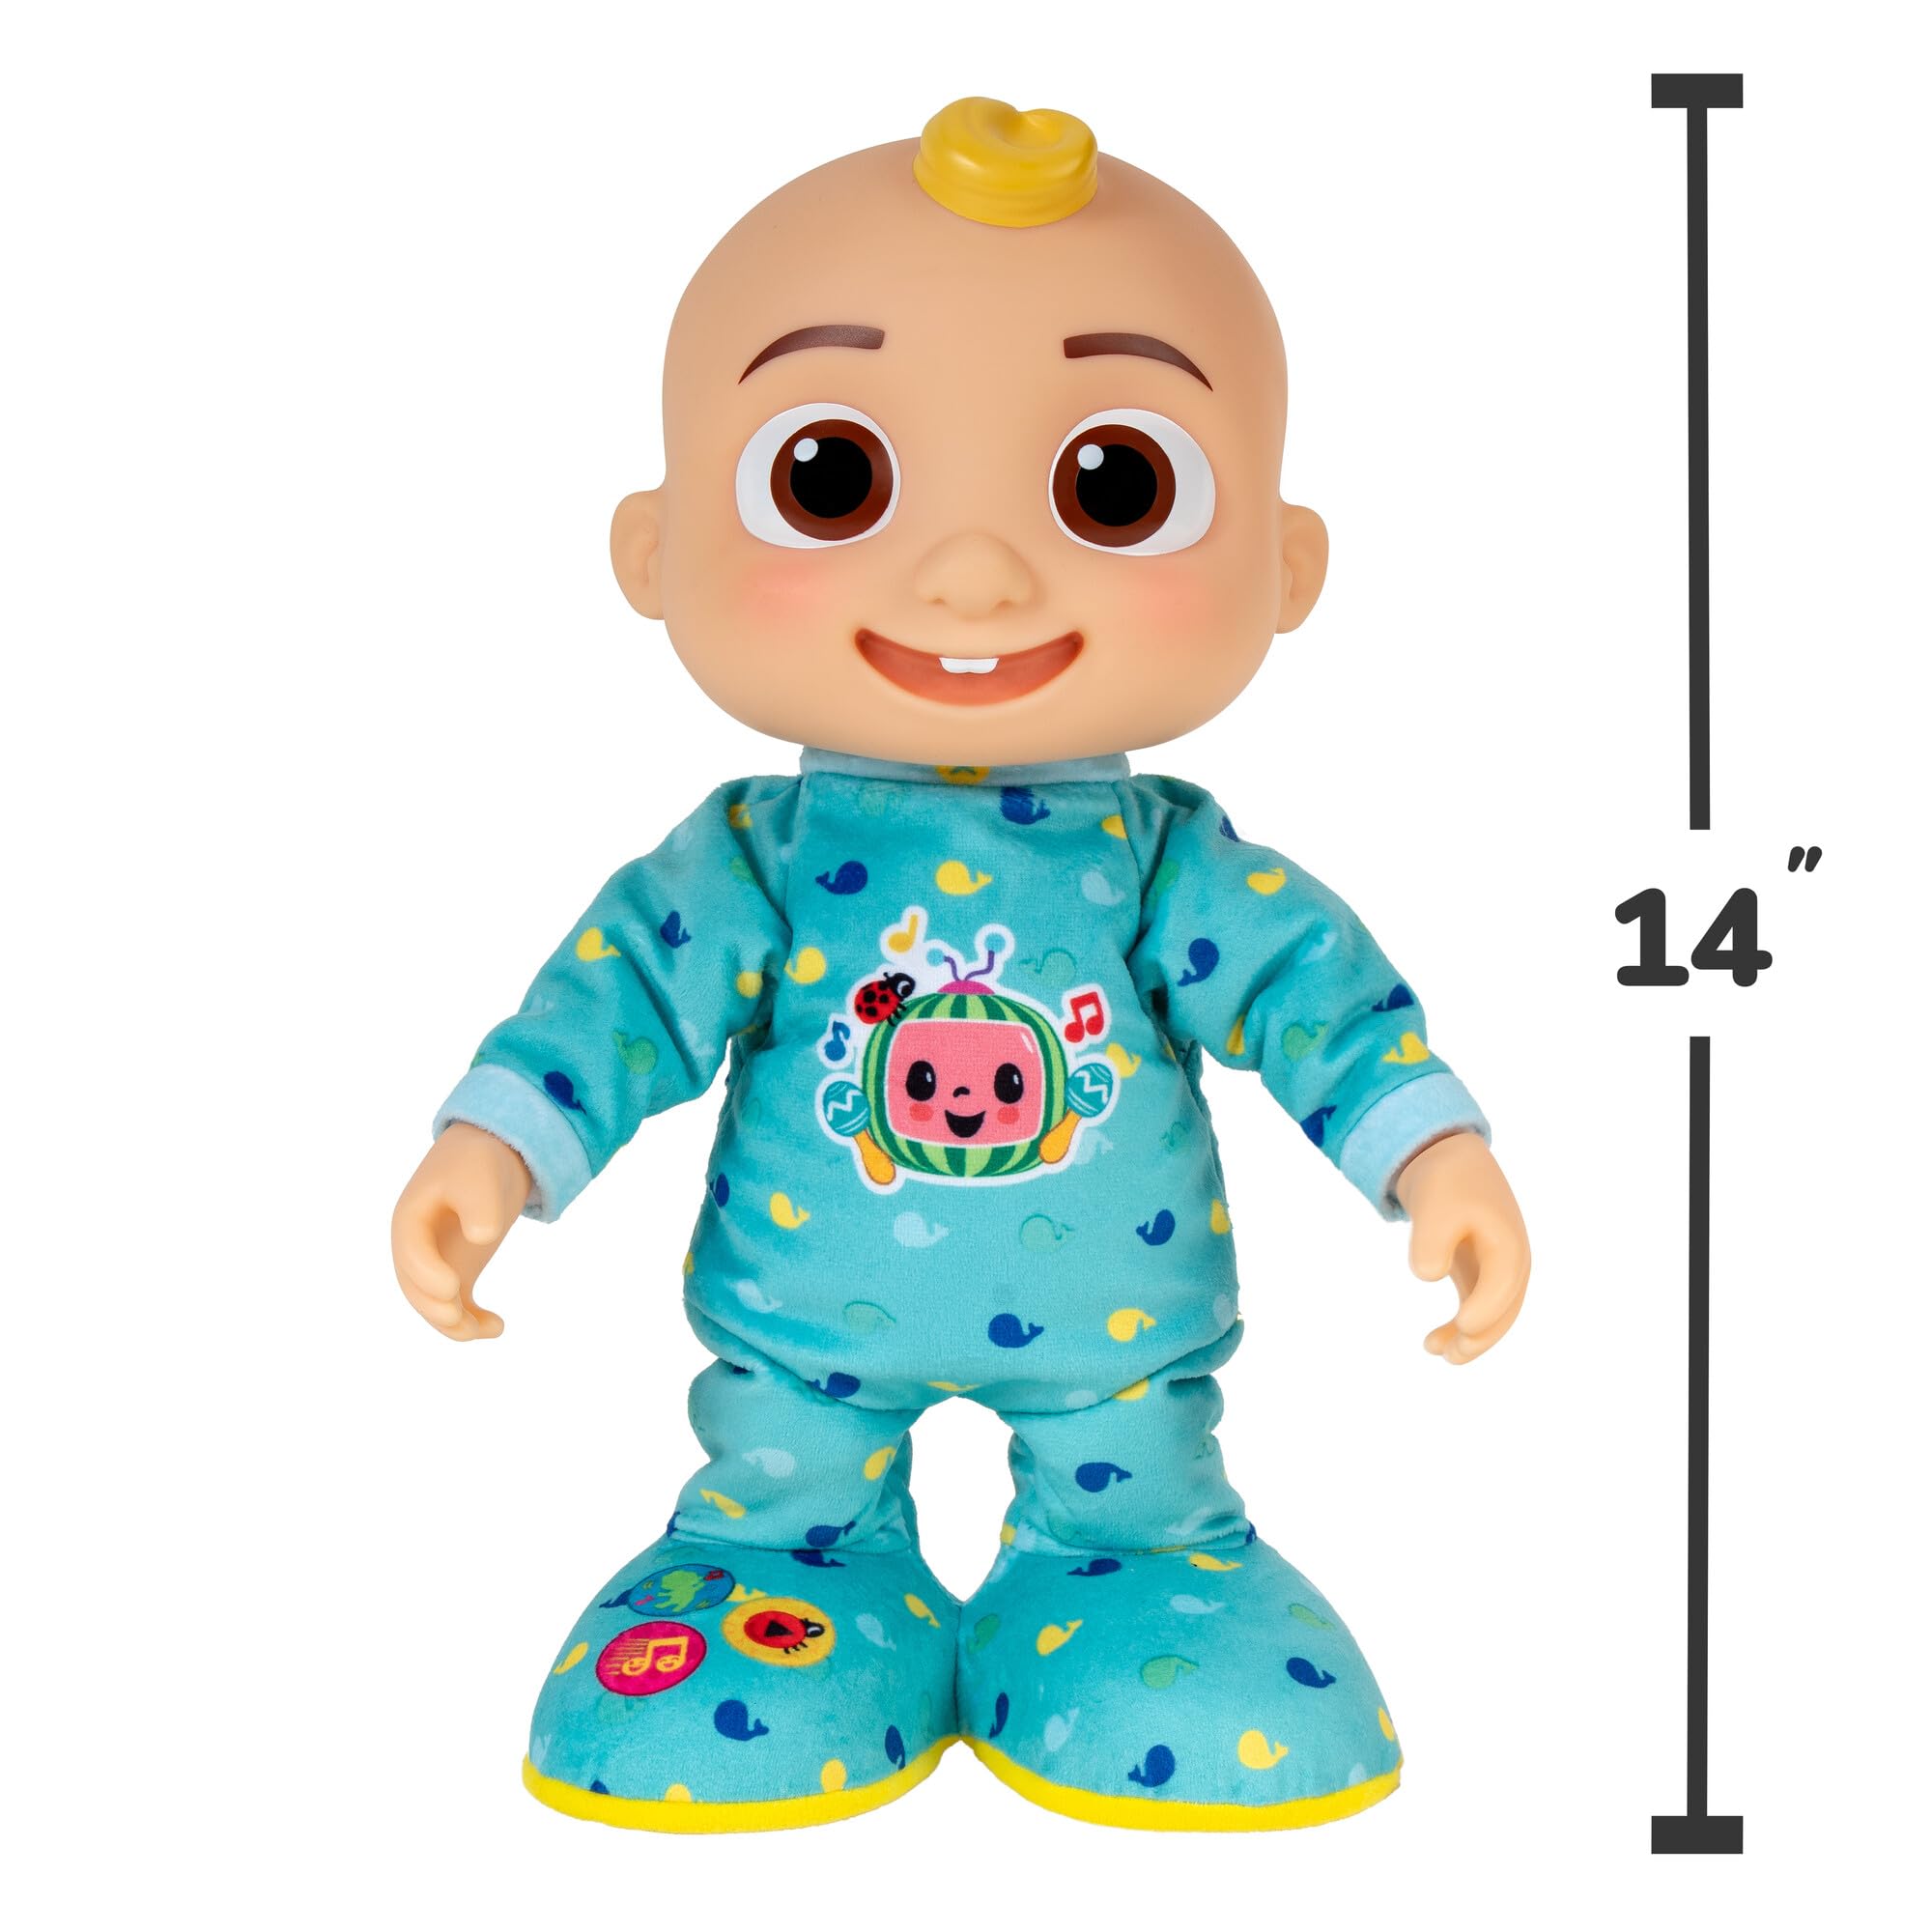 Cocomelon Dancing JJ Feature Doll - Learn to Dance with JJ - Lights, Sounds, Songs, Freeze Dance, and More - Move and Groove with 14” JJ - Toys for Babies, Toddlers, and Preschoolers